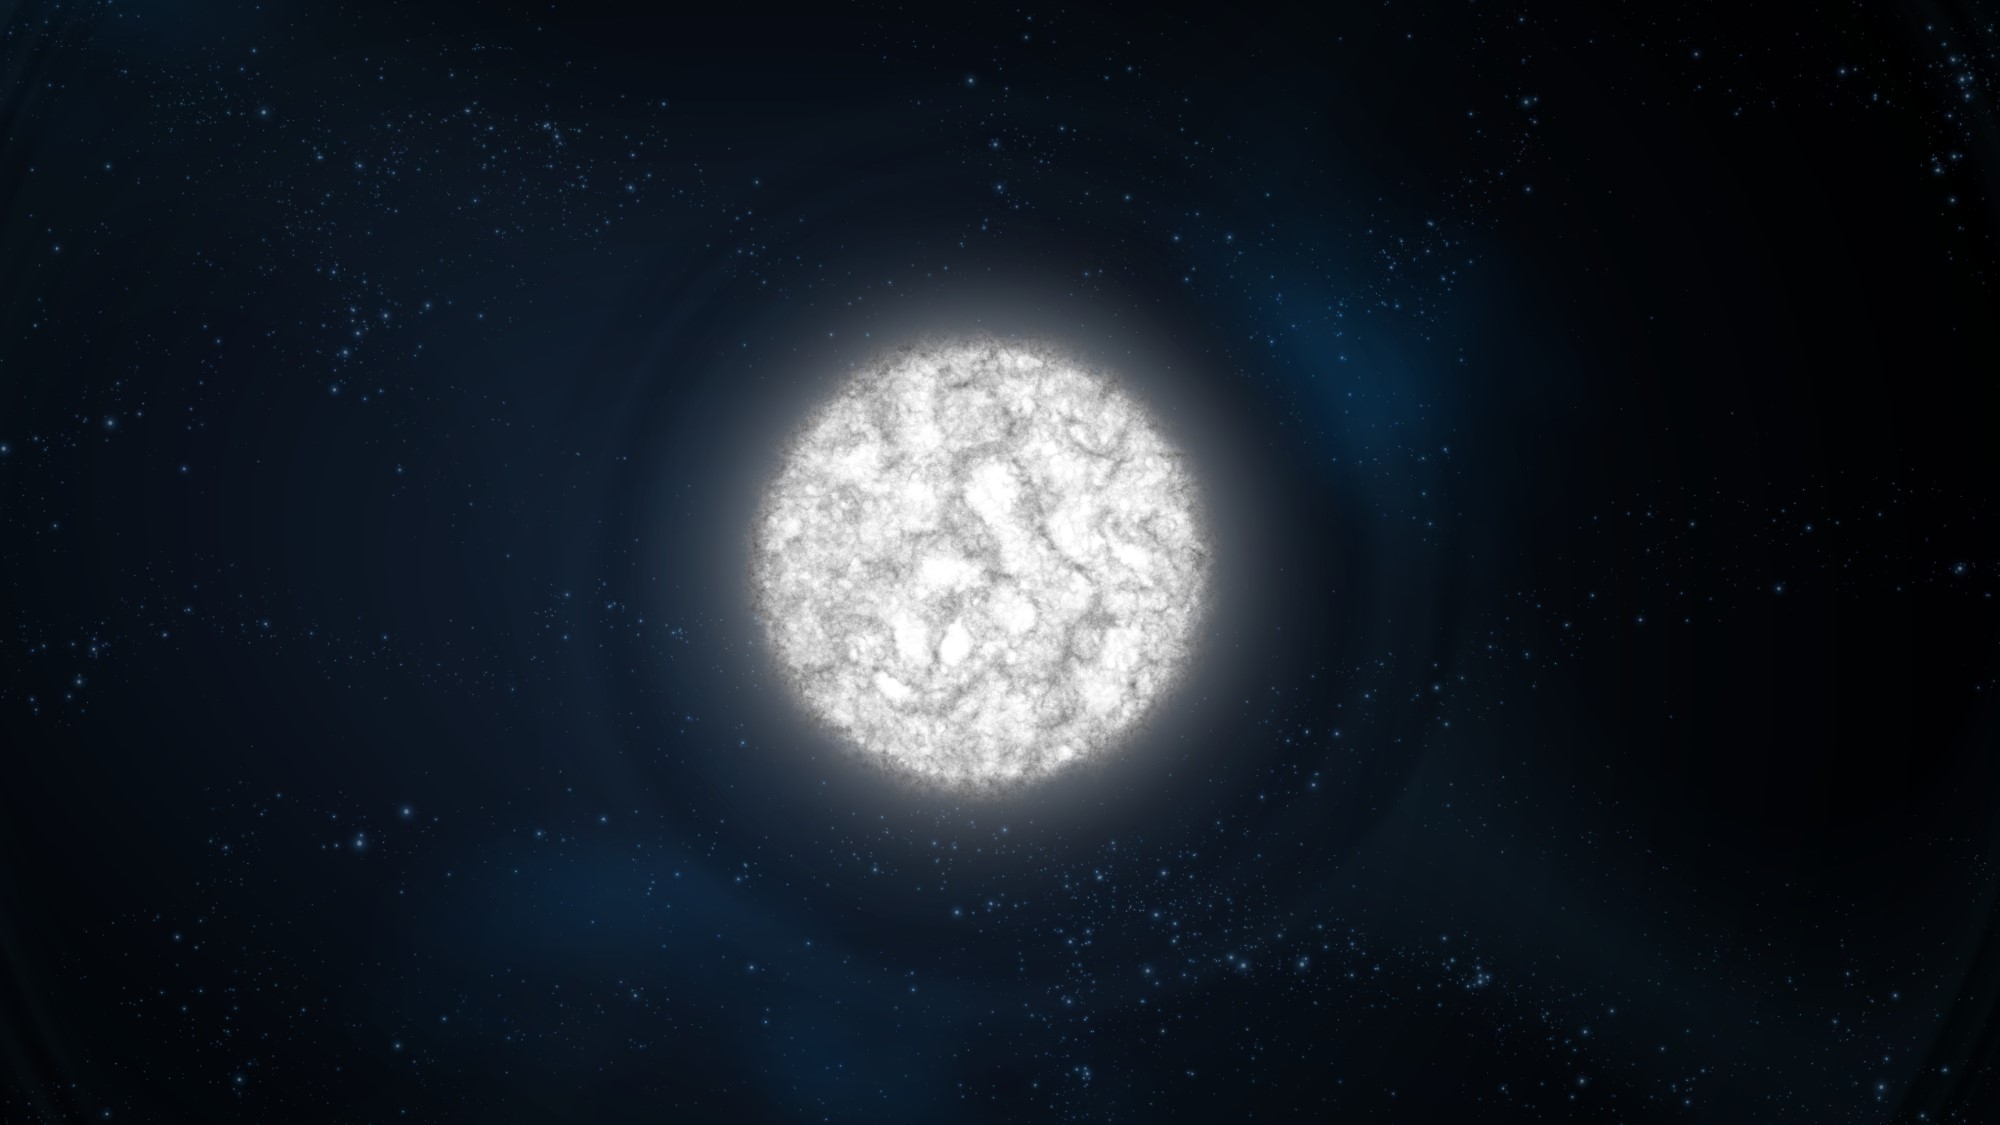 An artist's depiction of a white dwarf, the remnants of an exploded star.